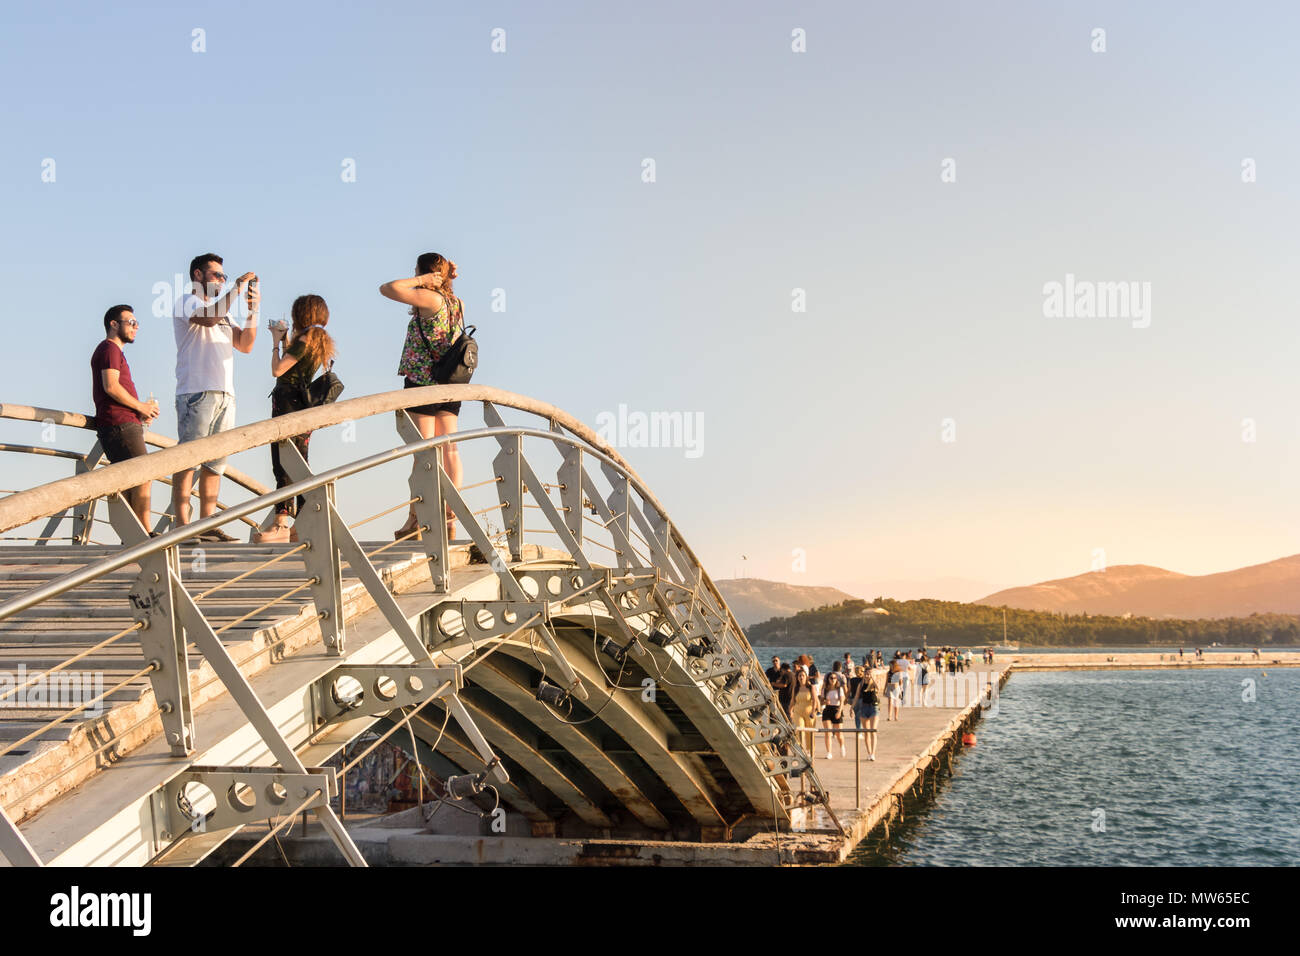 Volos, Thessaly, Greece - May 27th, 2018: People walking and taking photos on a little bridge at the Port of Volos, Pagasetic Gulf. Stock Photo